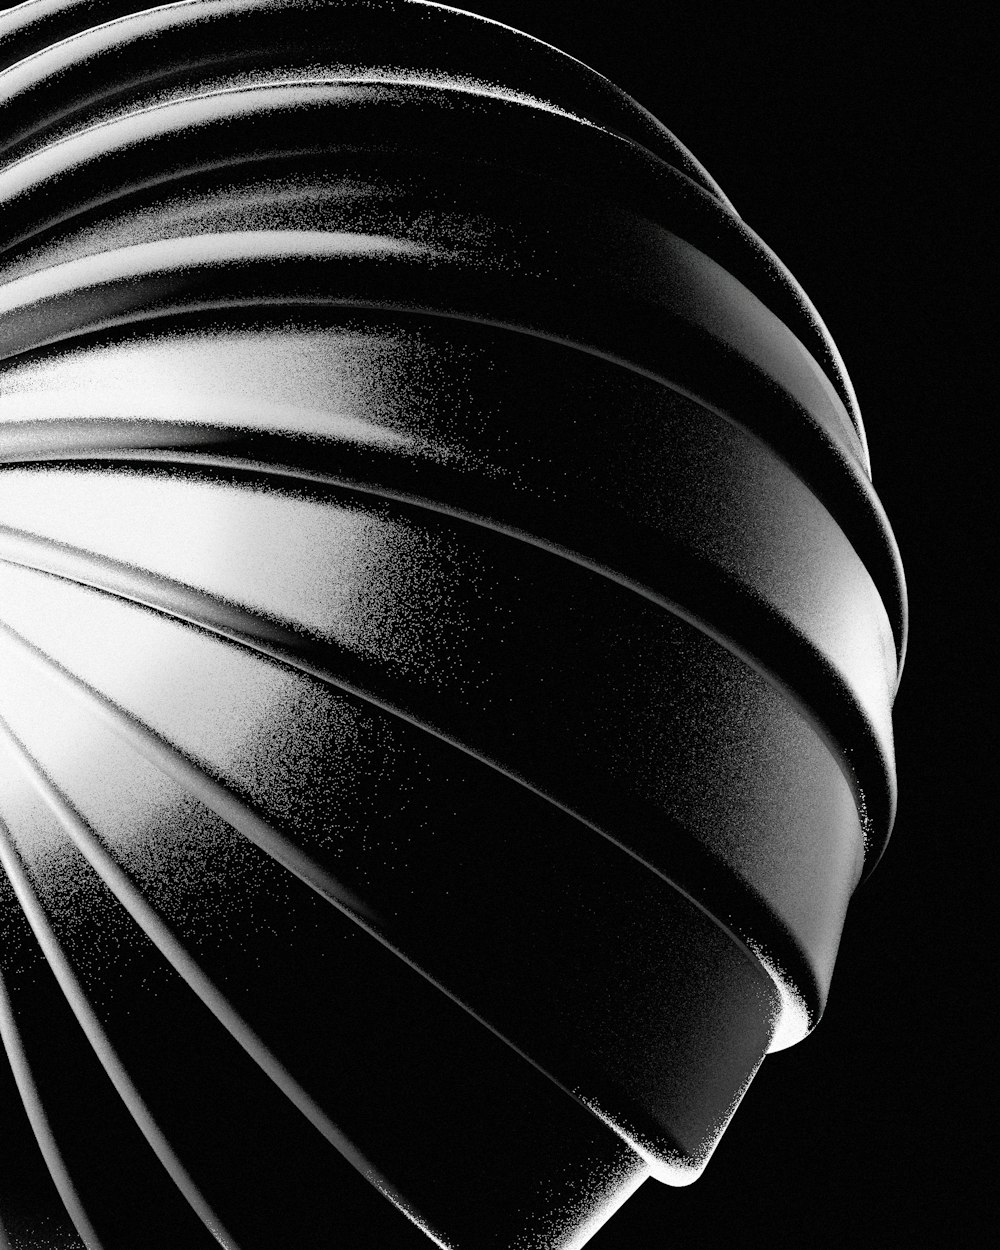 a black and white image of a spiral